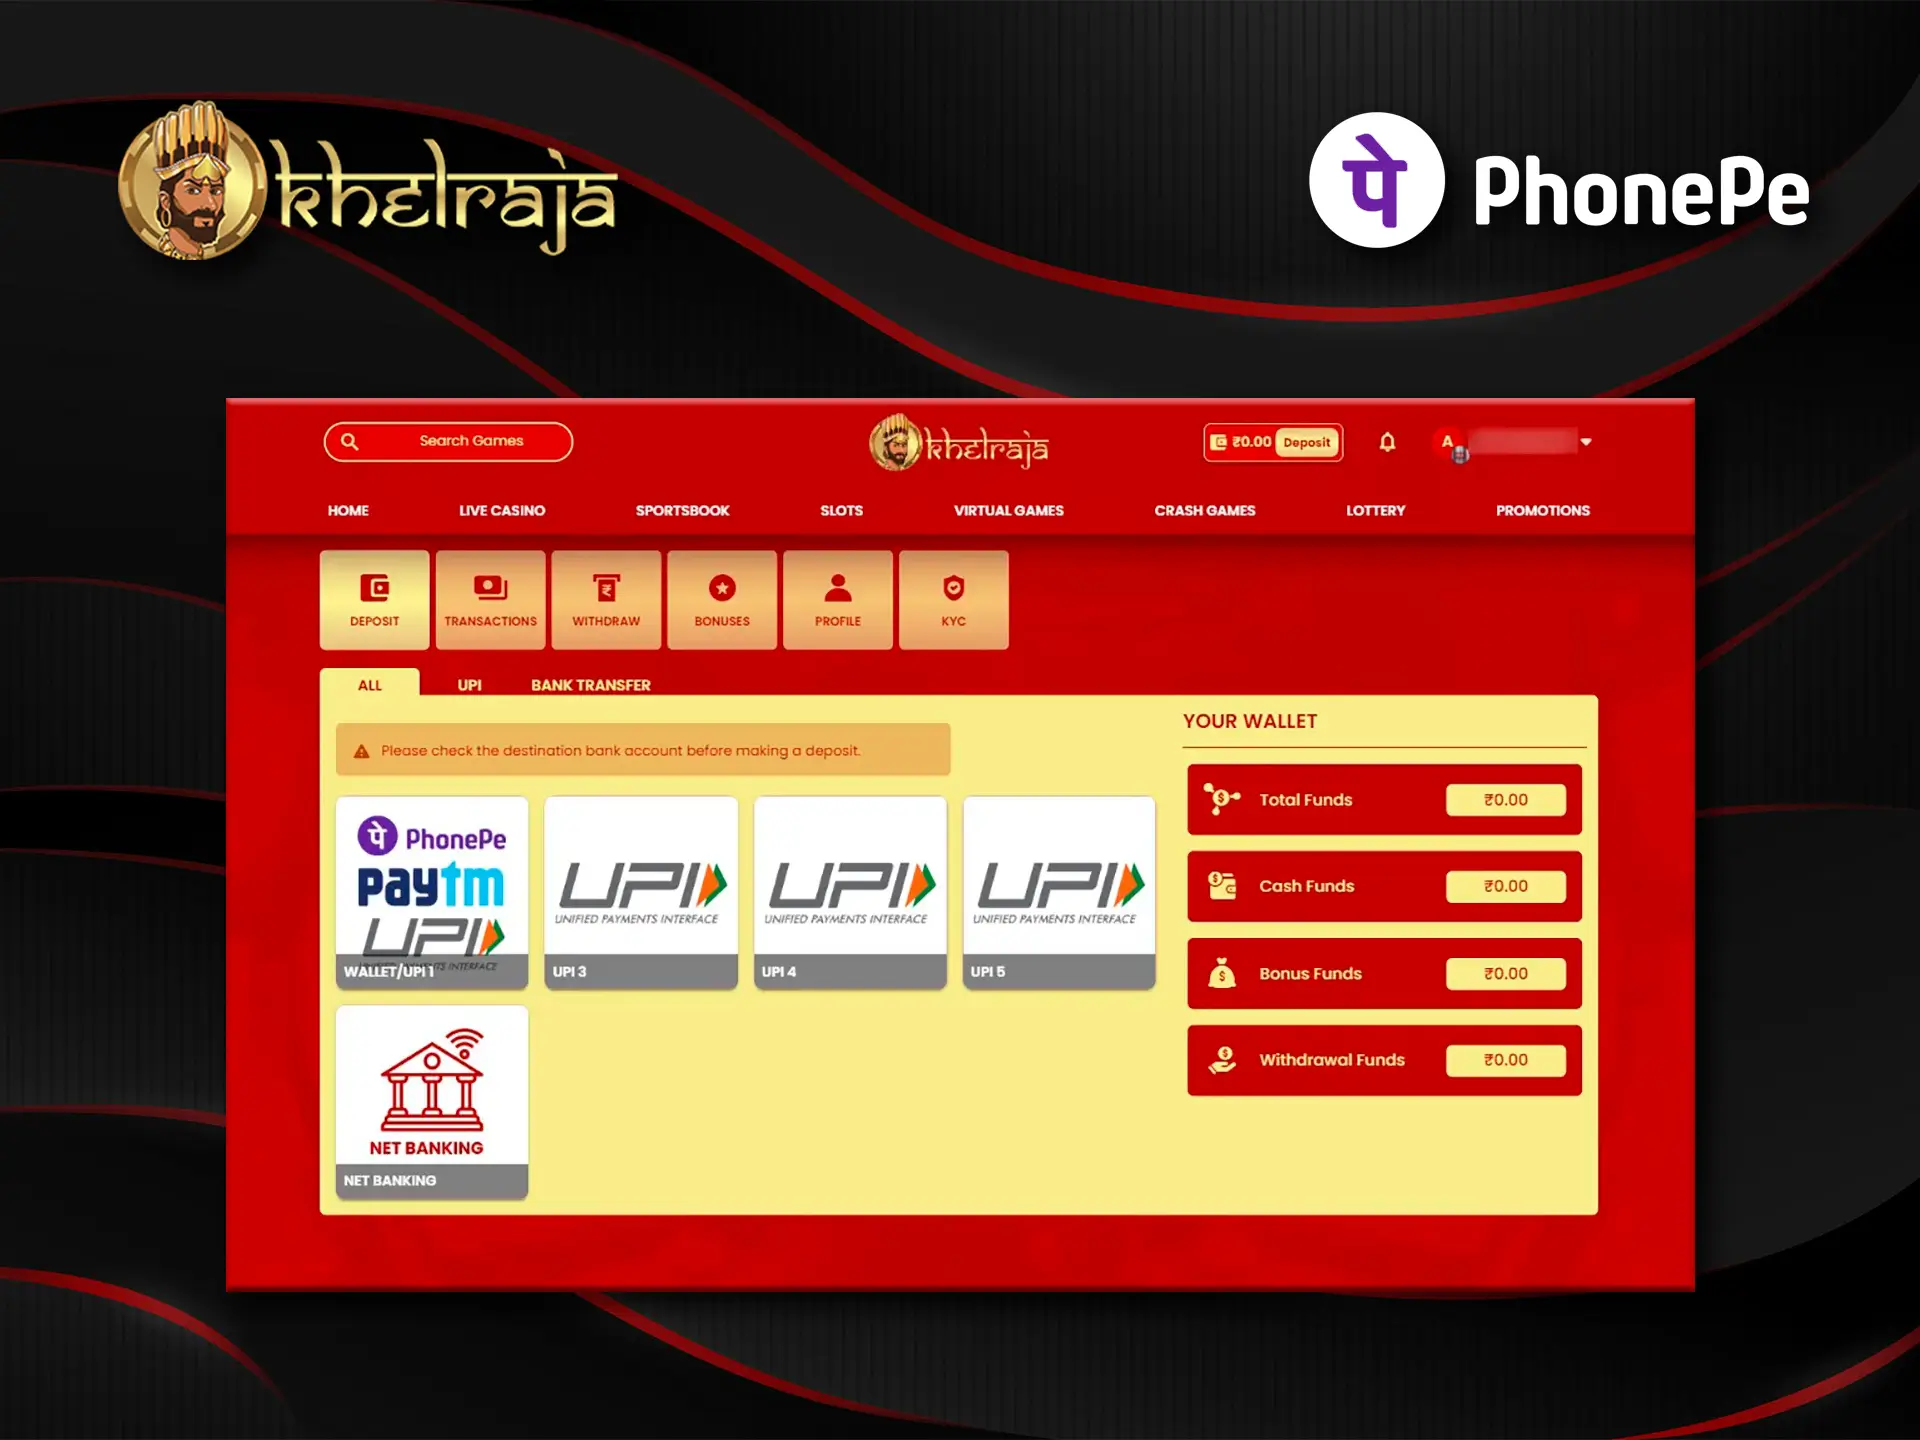 The close co-operation between Khelraja and PhonePe gives users a fast and unique way to deposit and withdraw funds.